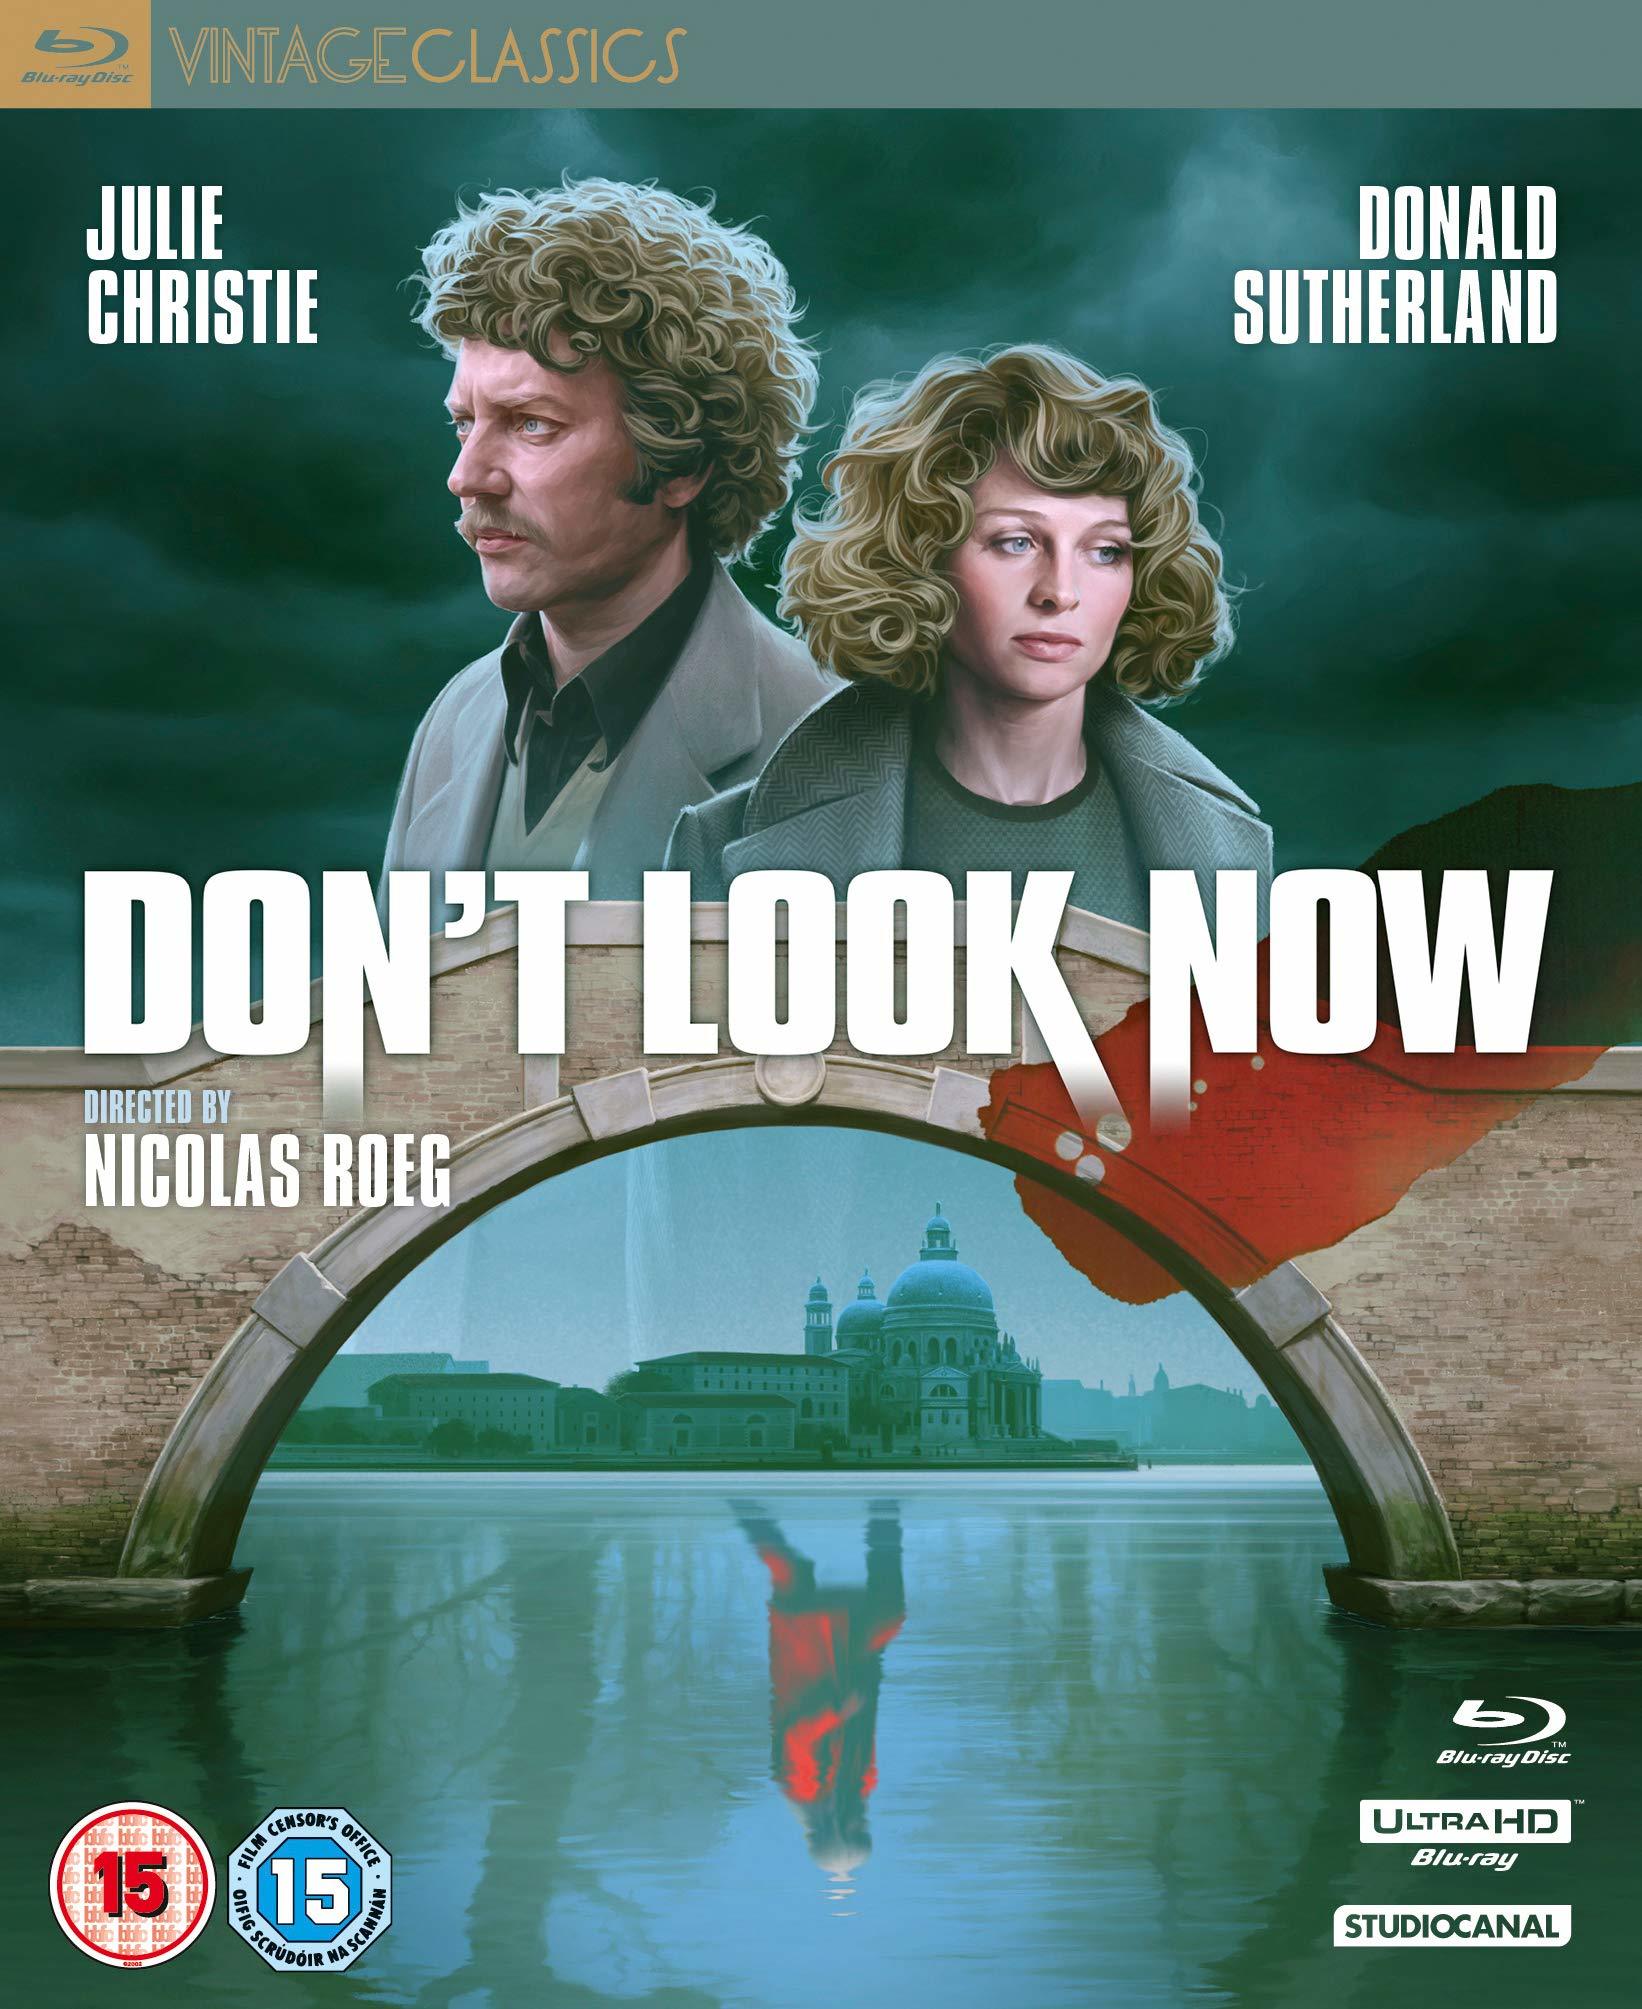 DON'T LOOK NOW (REGION FREE/B IMPORT - LIMITED EDITION) 4K UHD/BLU-RAY/CD